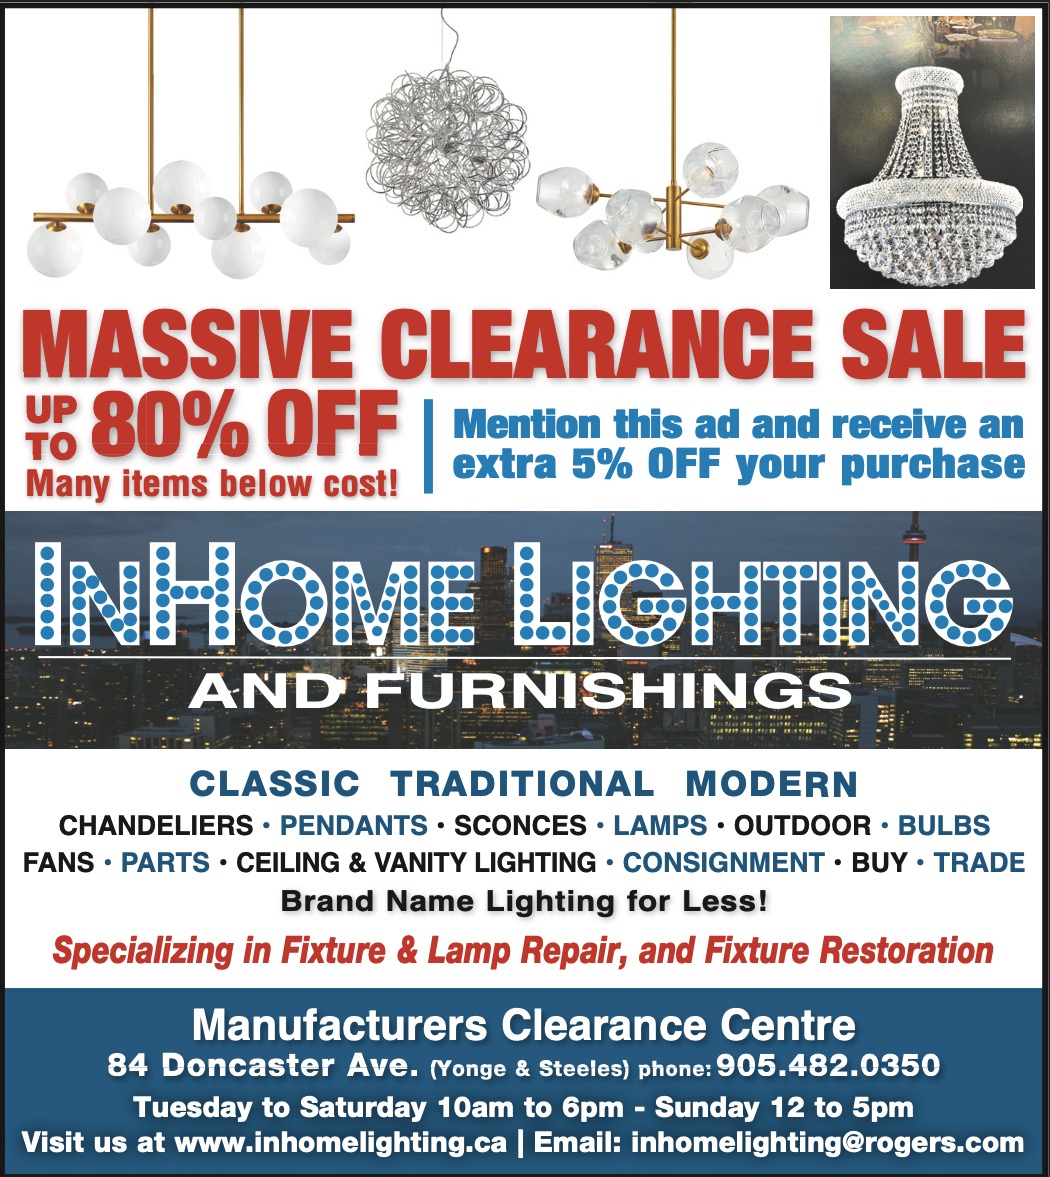 InHomeLighting - Massive Clearance Sale of Light Fixtures and Lamps.